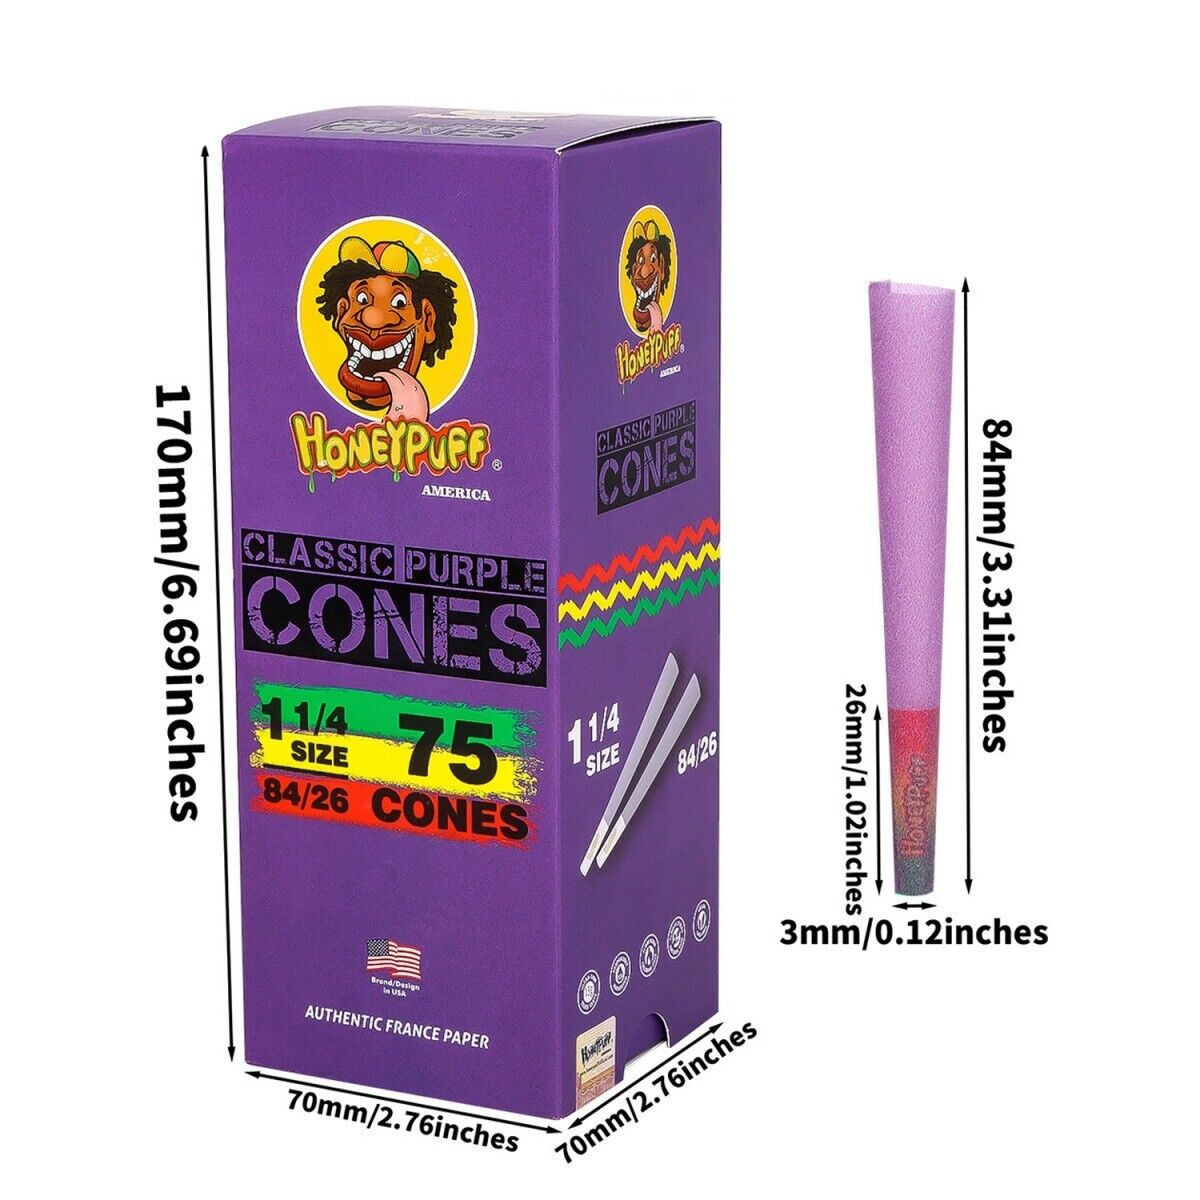 Honeypuff Pre-rolled Cones 1 1/4 Size 84 mm Purple Rolling Paper - 75 Pcs